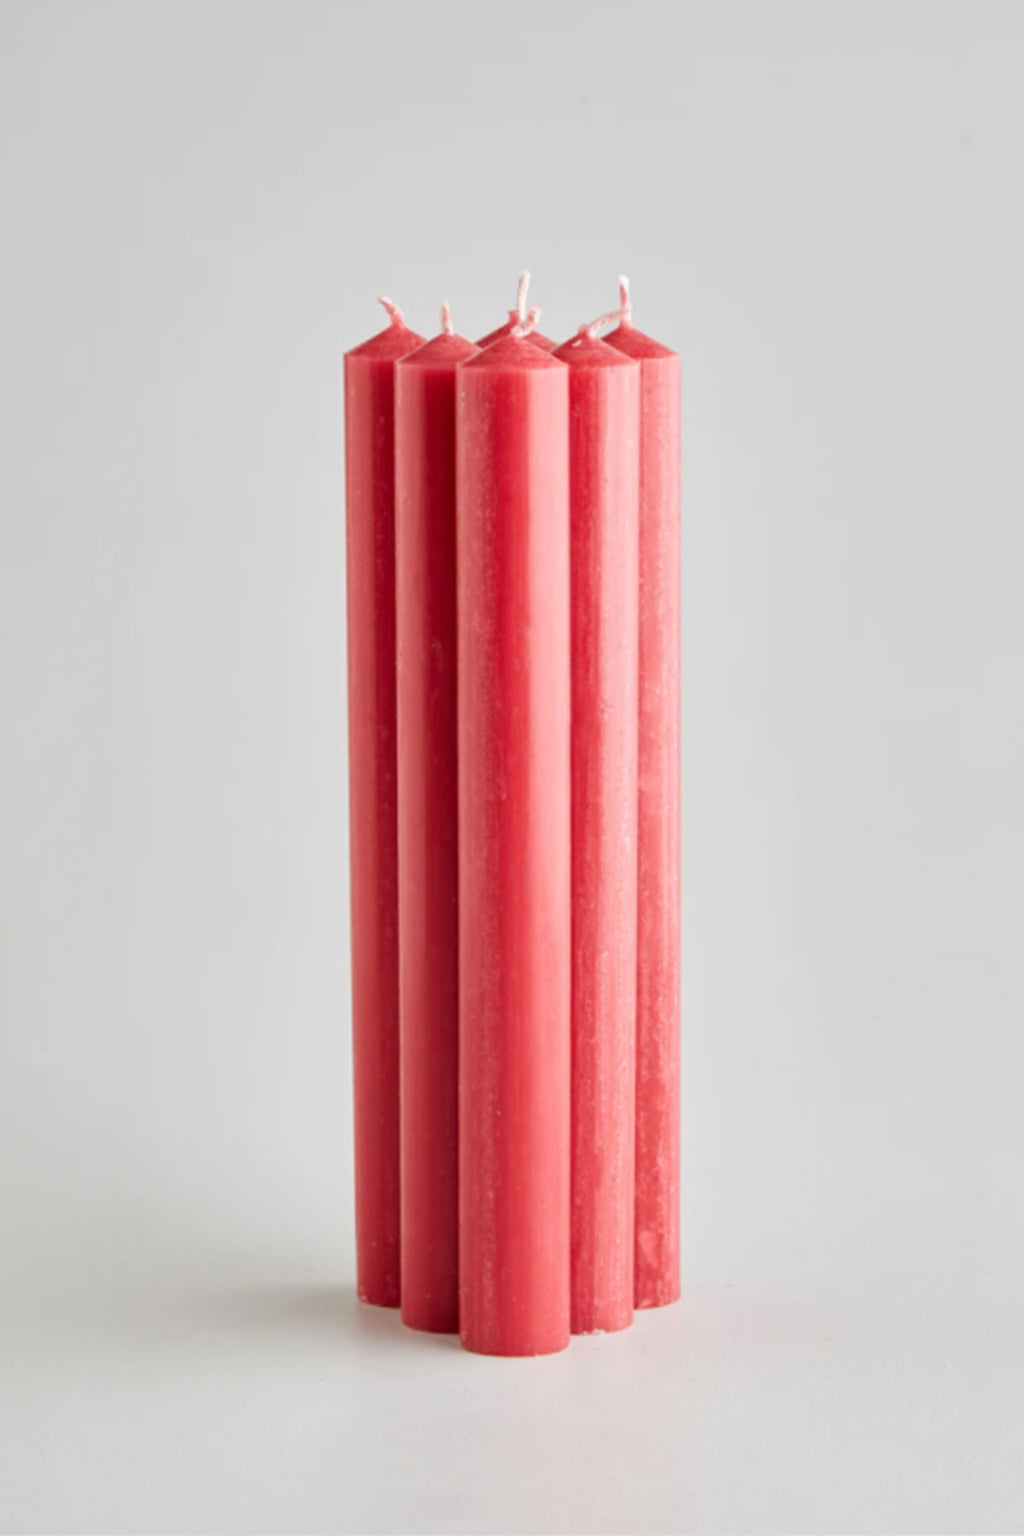 St. Eval Pink Dinner Candles - The Mercantile London